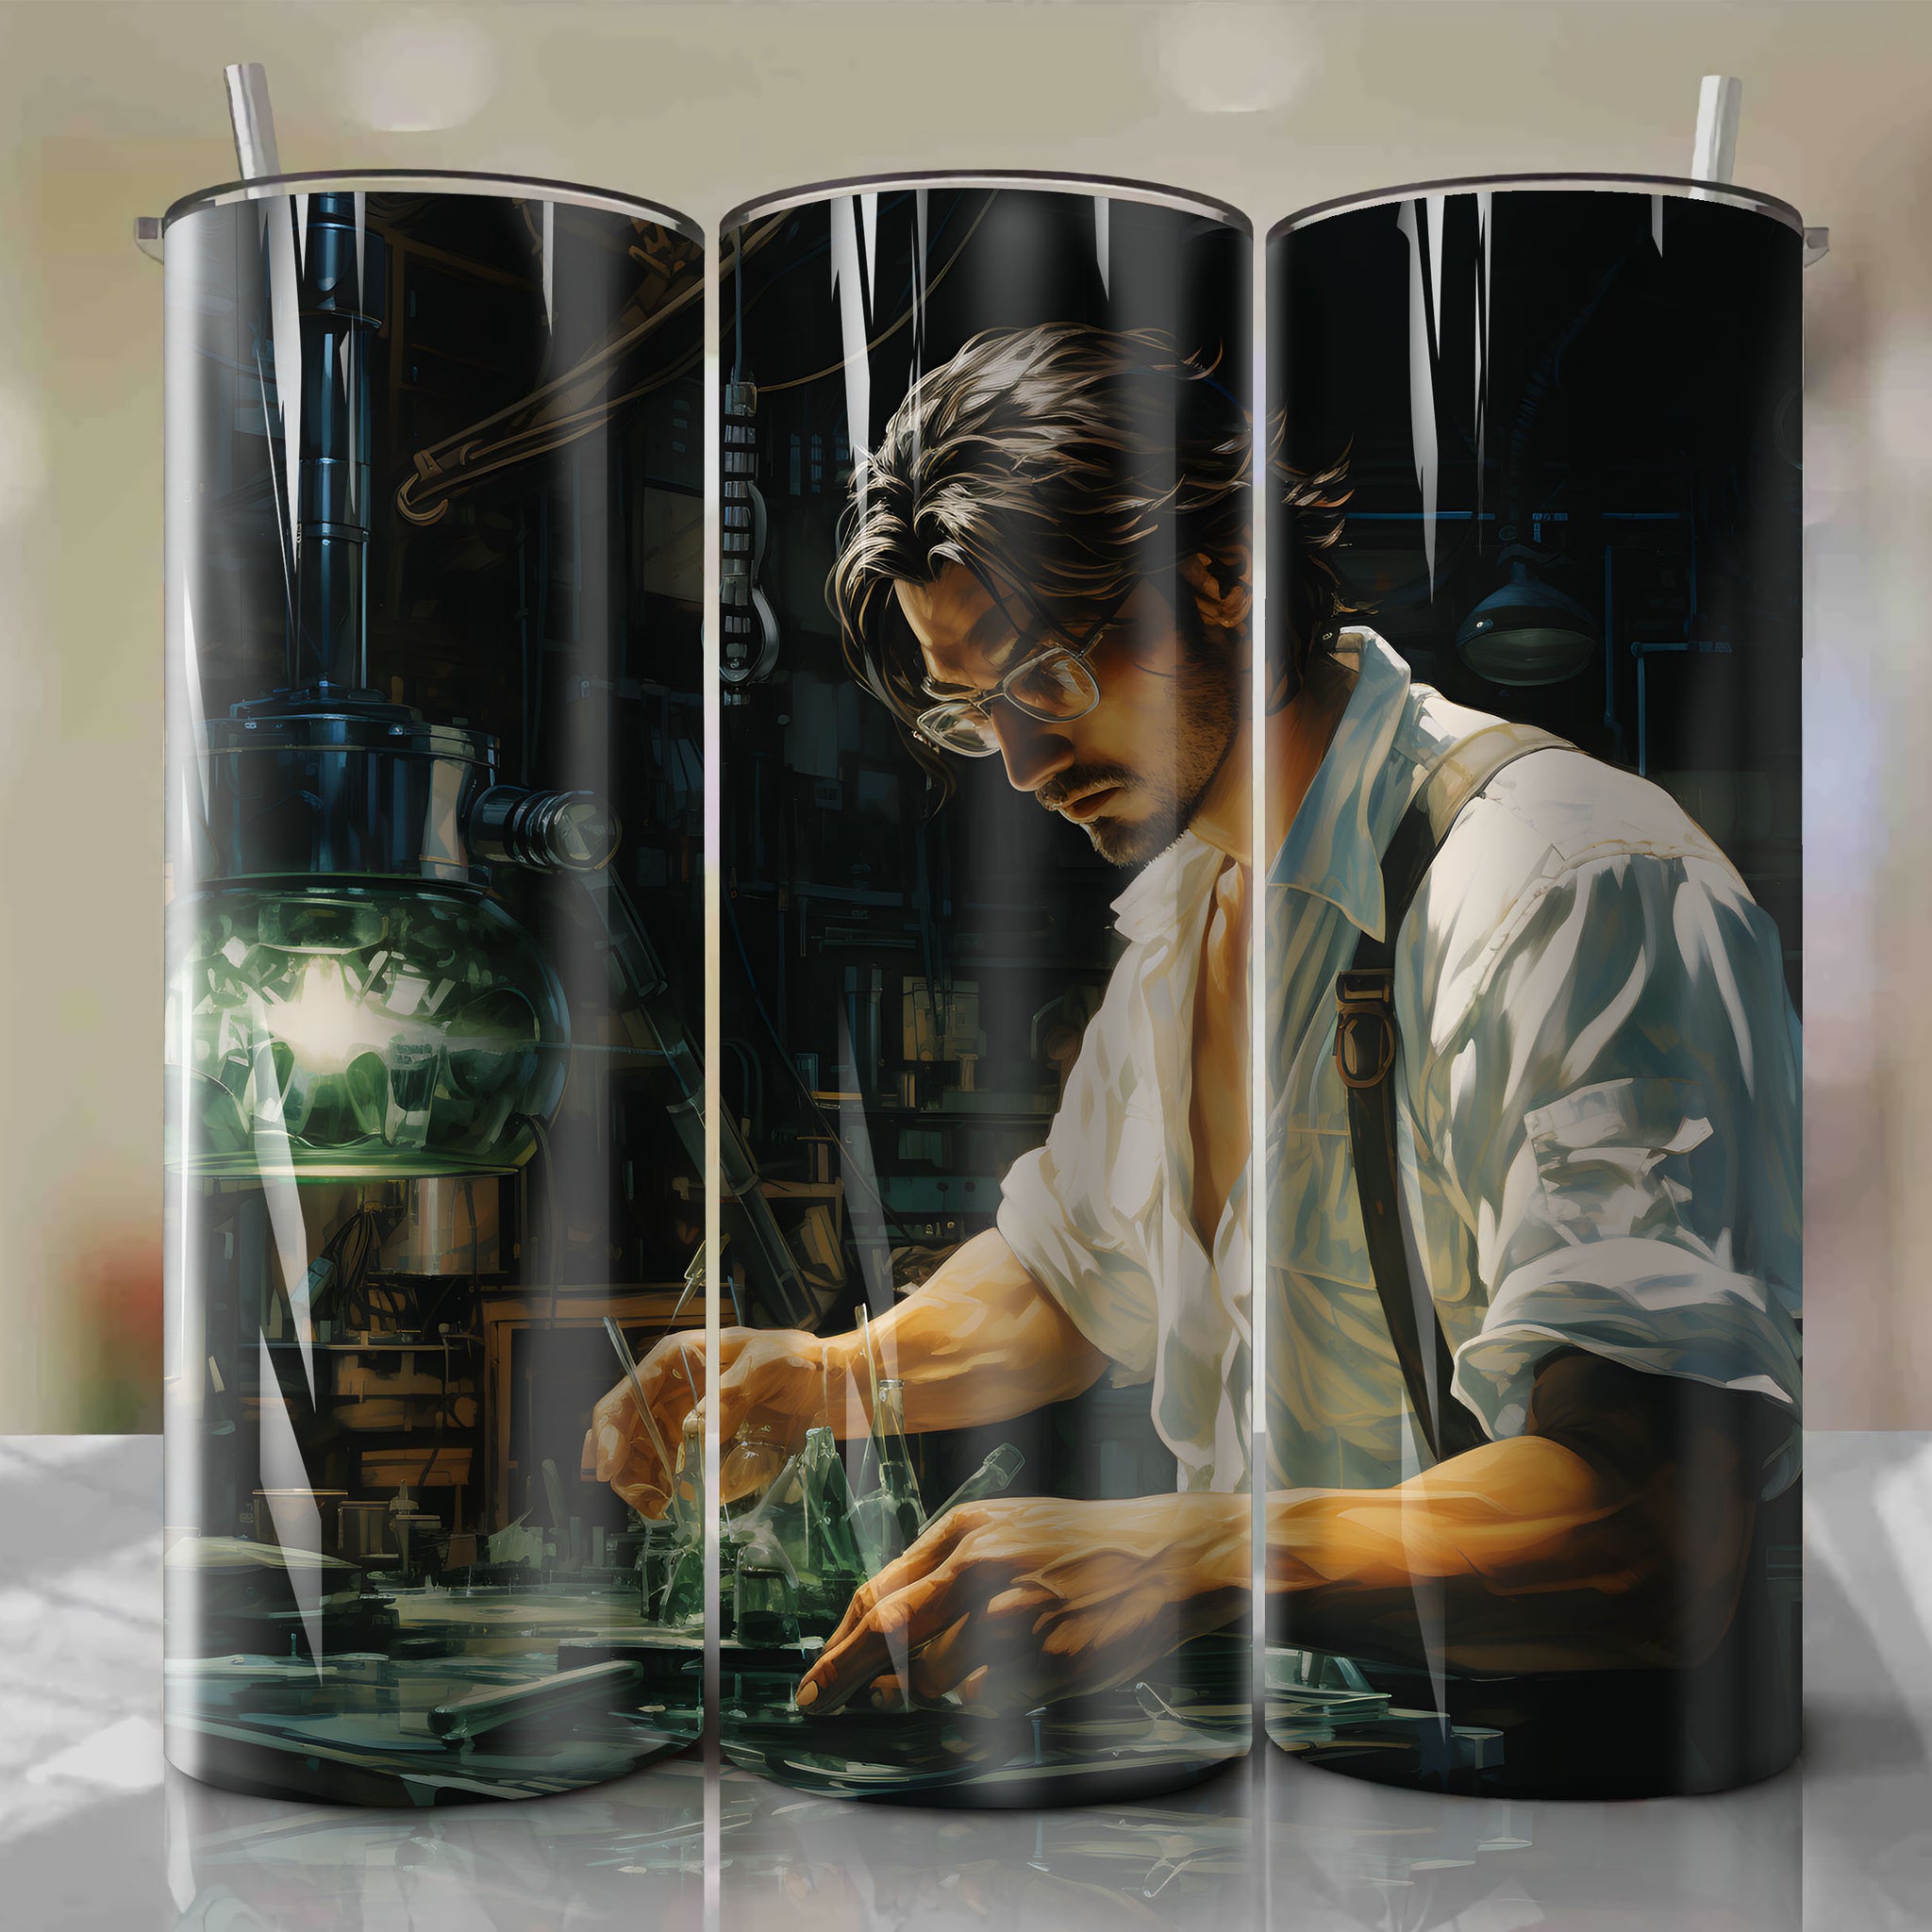 20 Oz Tumbler Wrap - Innovative Design by Otacon in a Detailed Digital Painting
